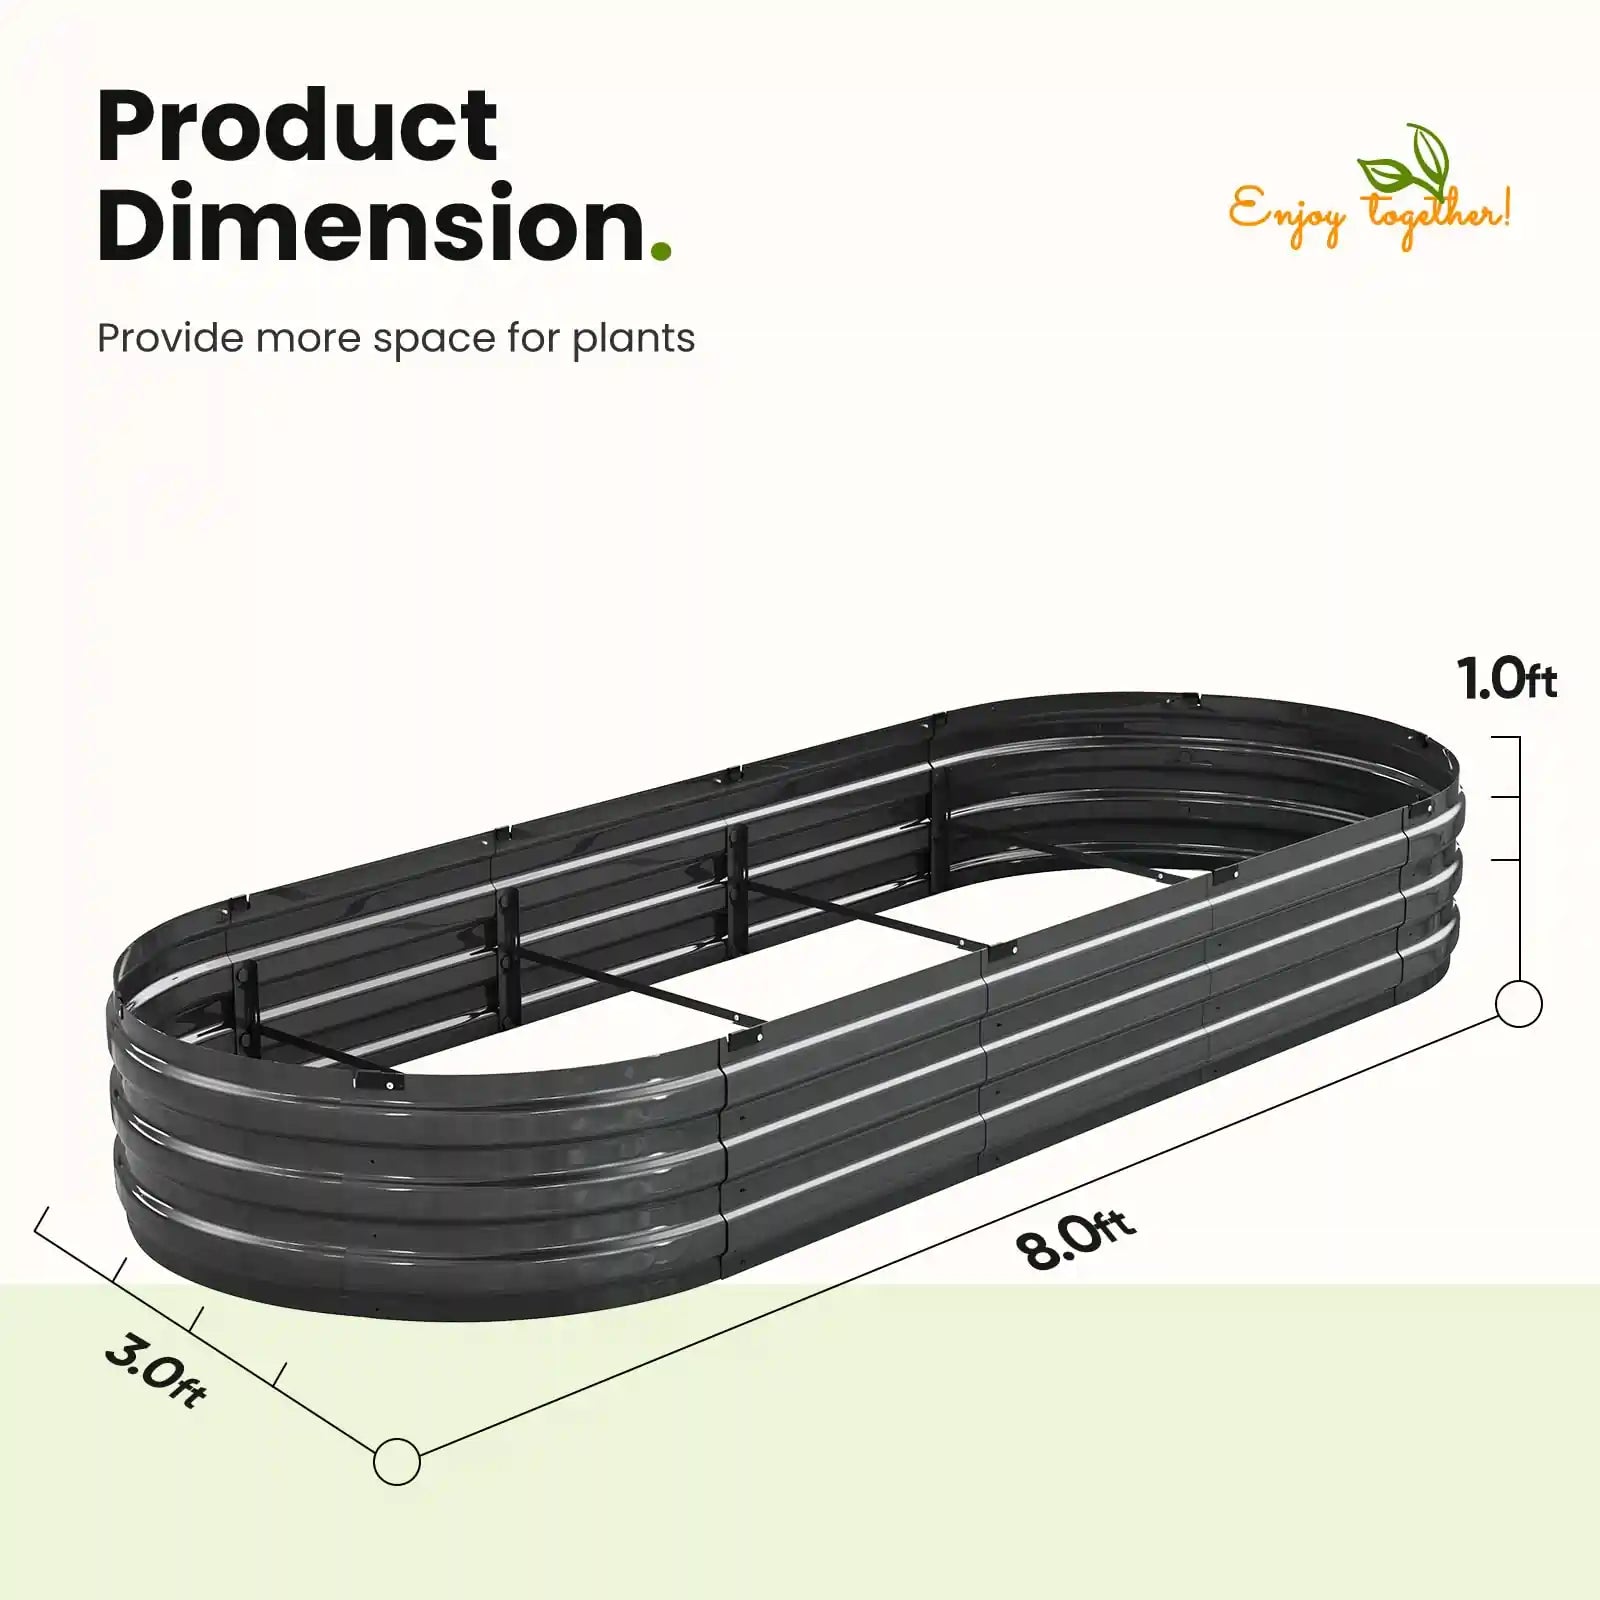 KING BIRD Screwless Raised Garden Bed 8x3x1ft product dimension#size_8x3x1ft